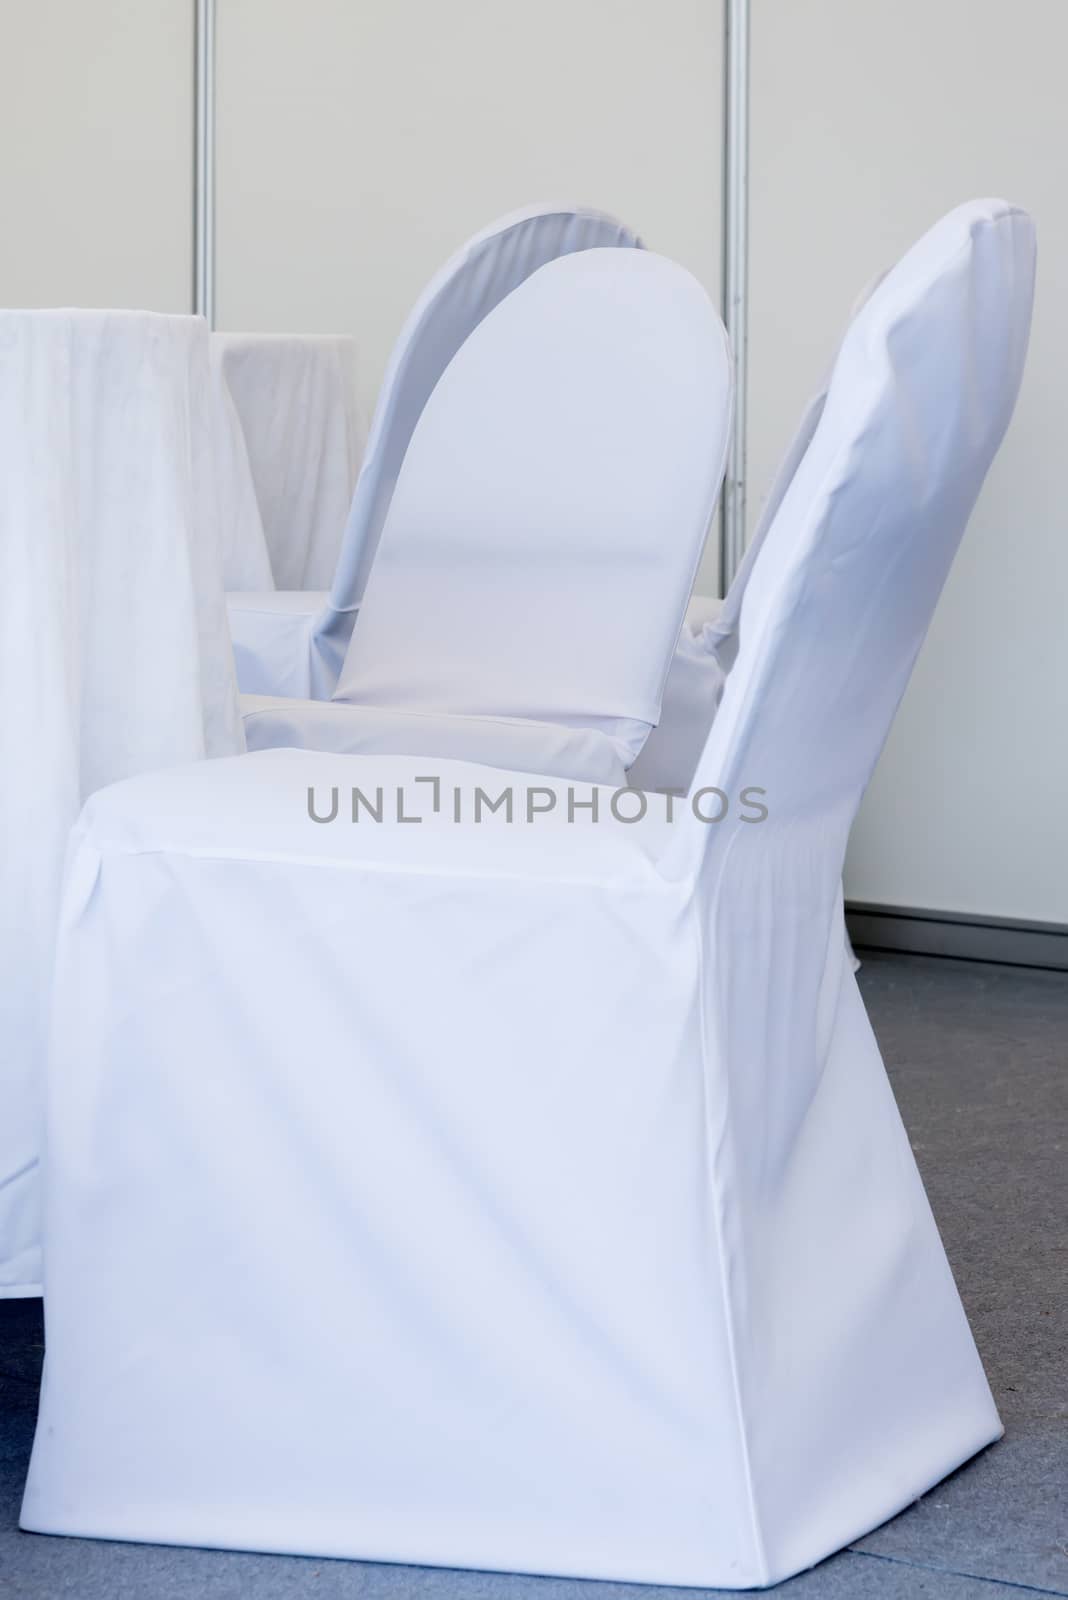 the chairs with white fabric cover for celebrations